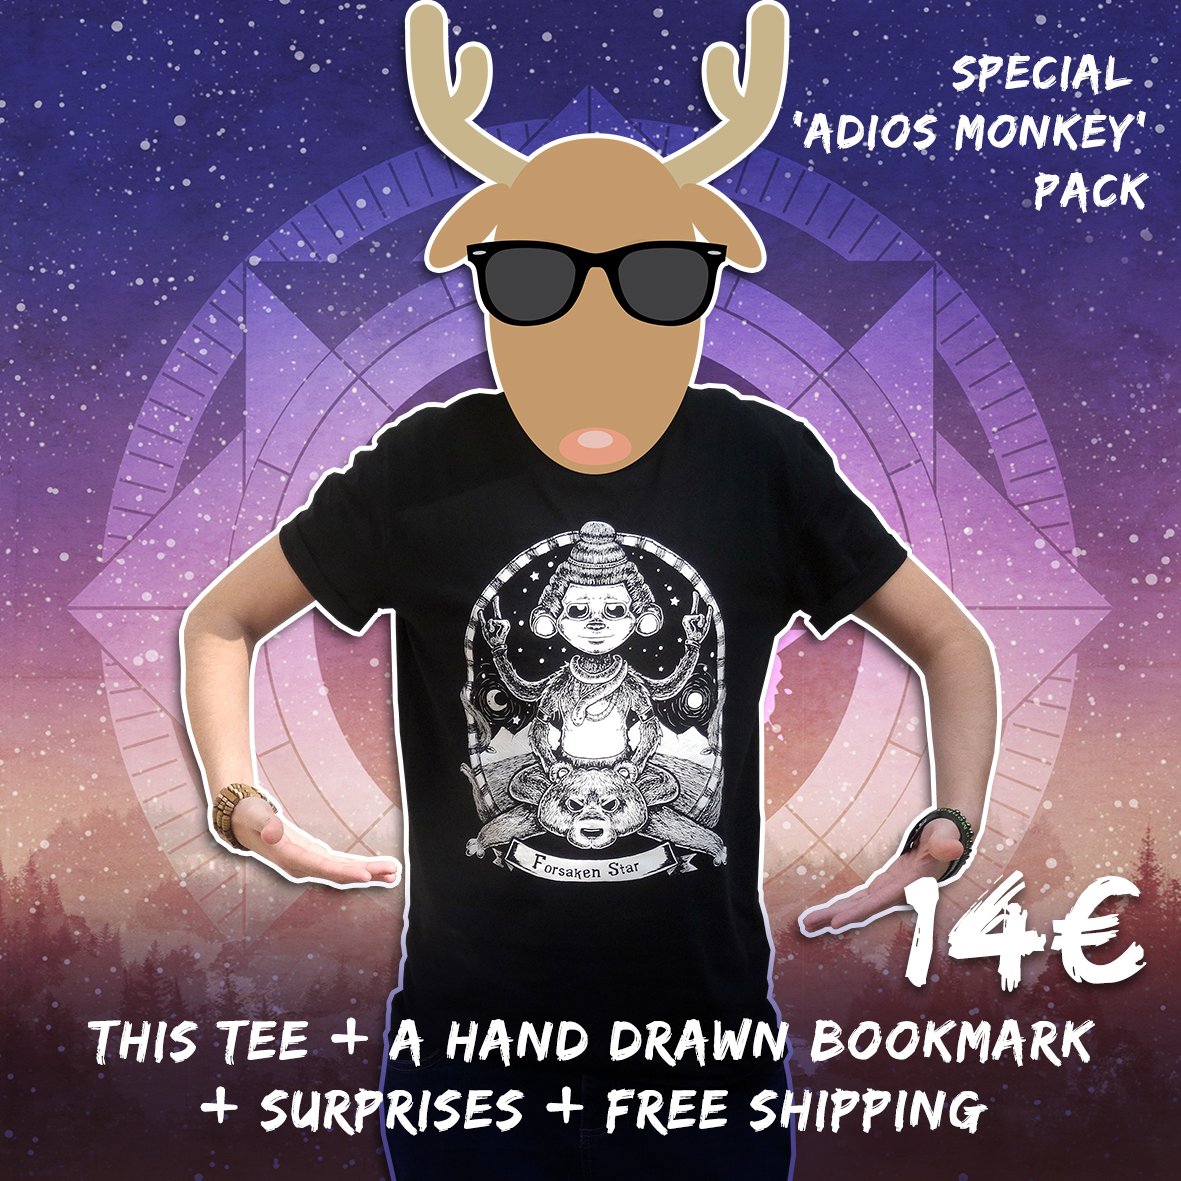 "Adios Monkey" special pack (Free shipping)